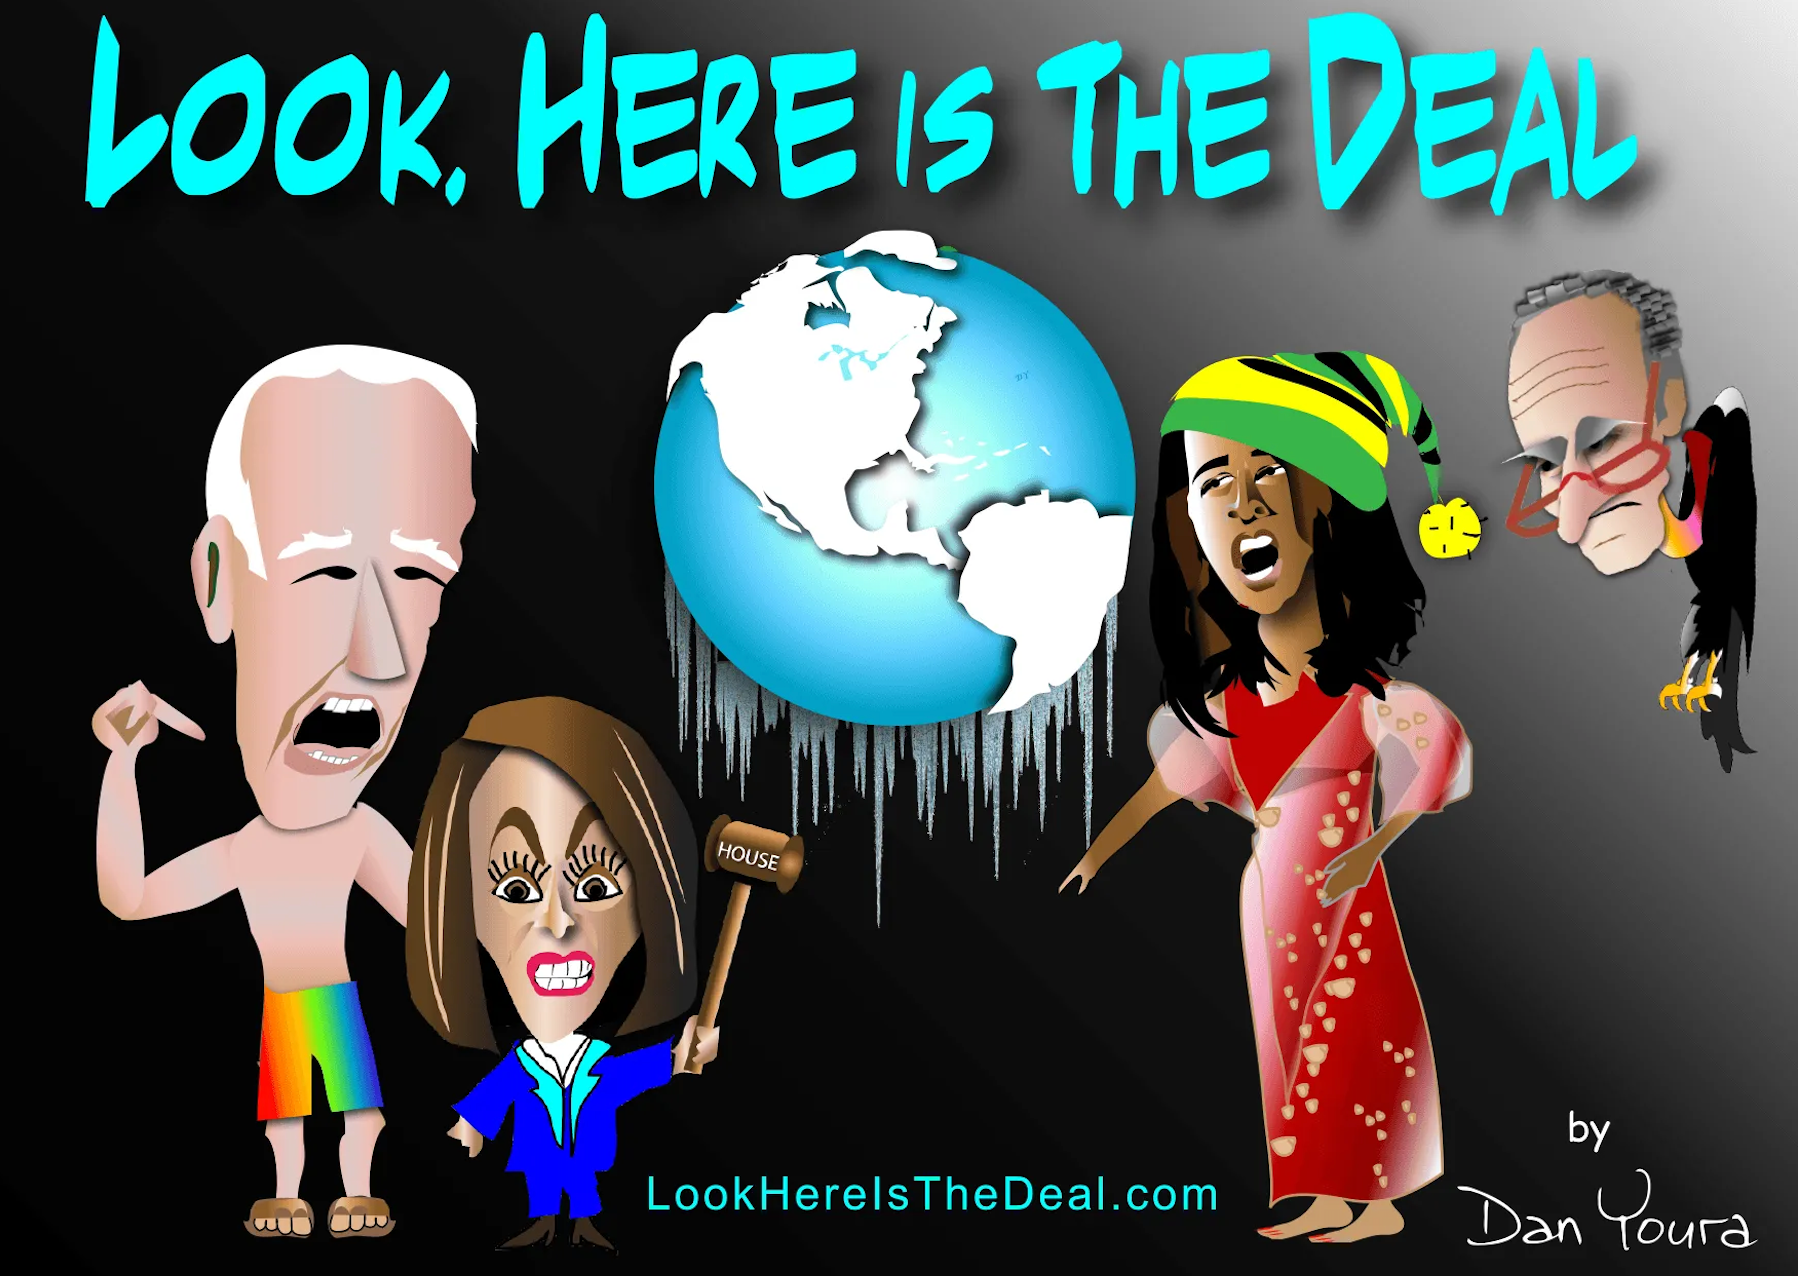 Look, Here Is the Deal by Dan Youra